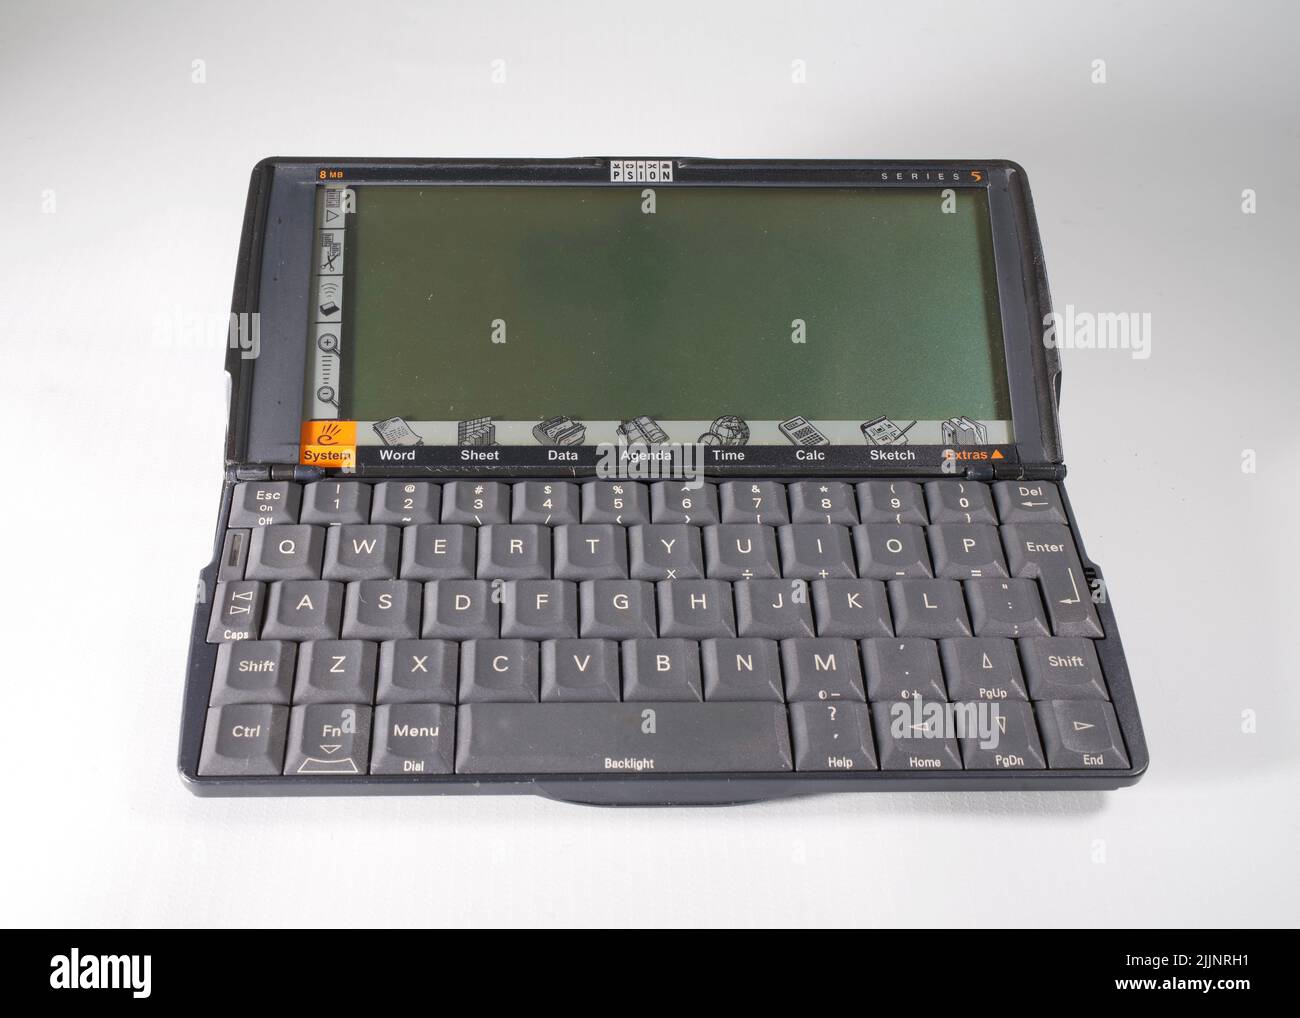 A closeup of a vintage Psion Series 5 palmtop computer from 1997 on the white background Stock Photo